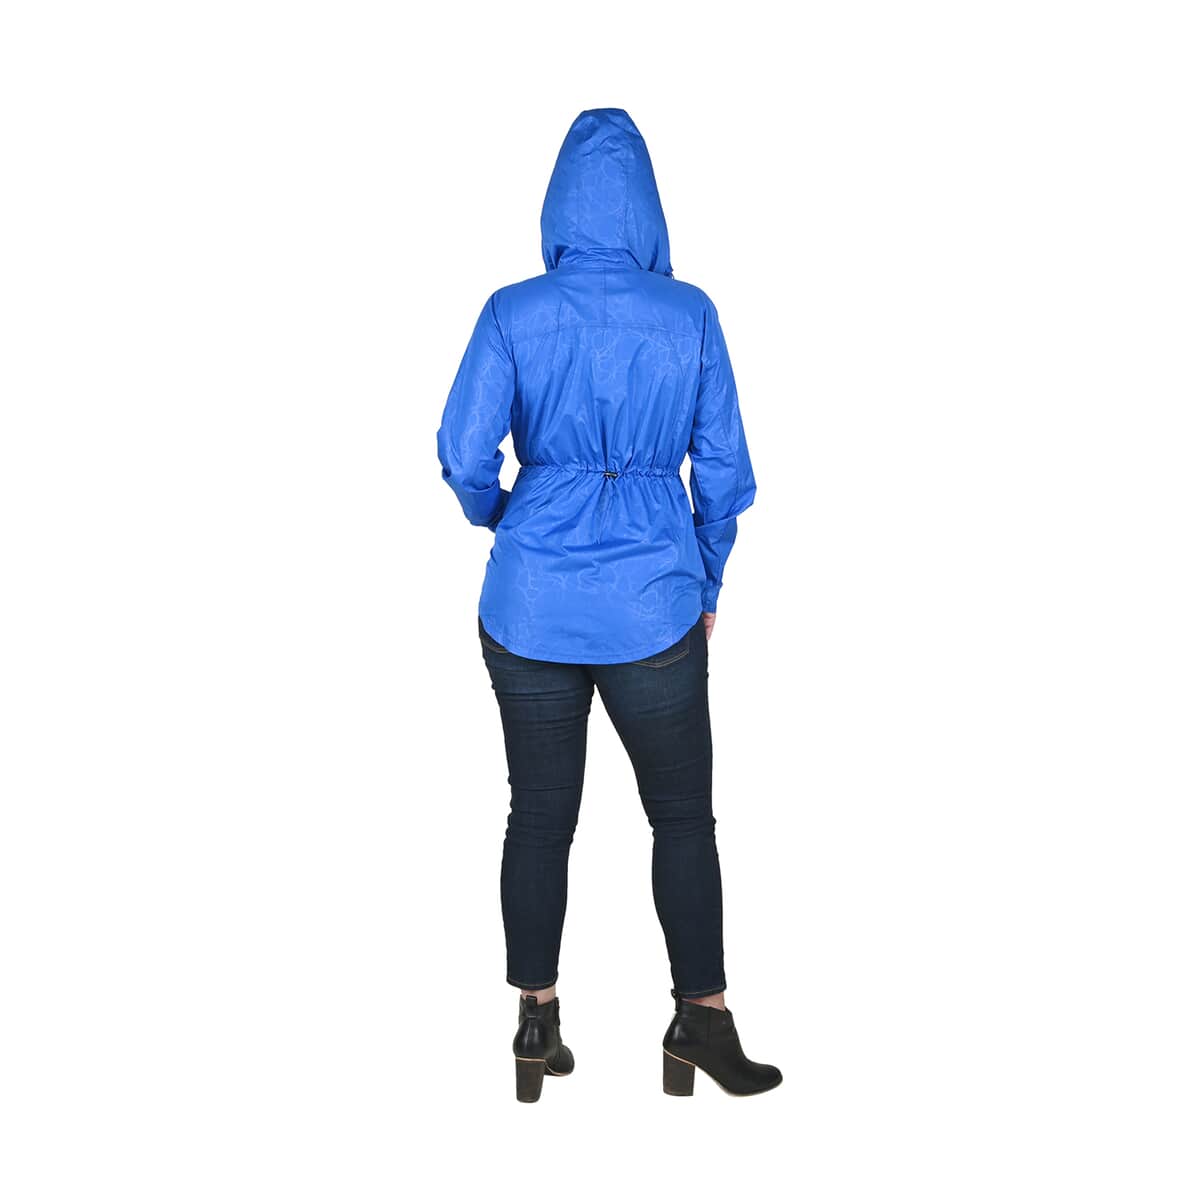 LAYER8 Royal Blue Hooded Windbreaker - Small image number 1